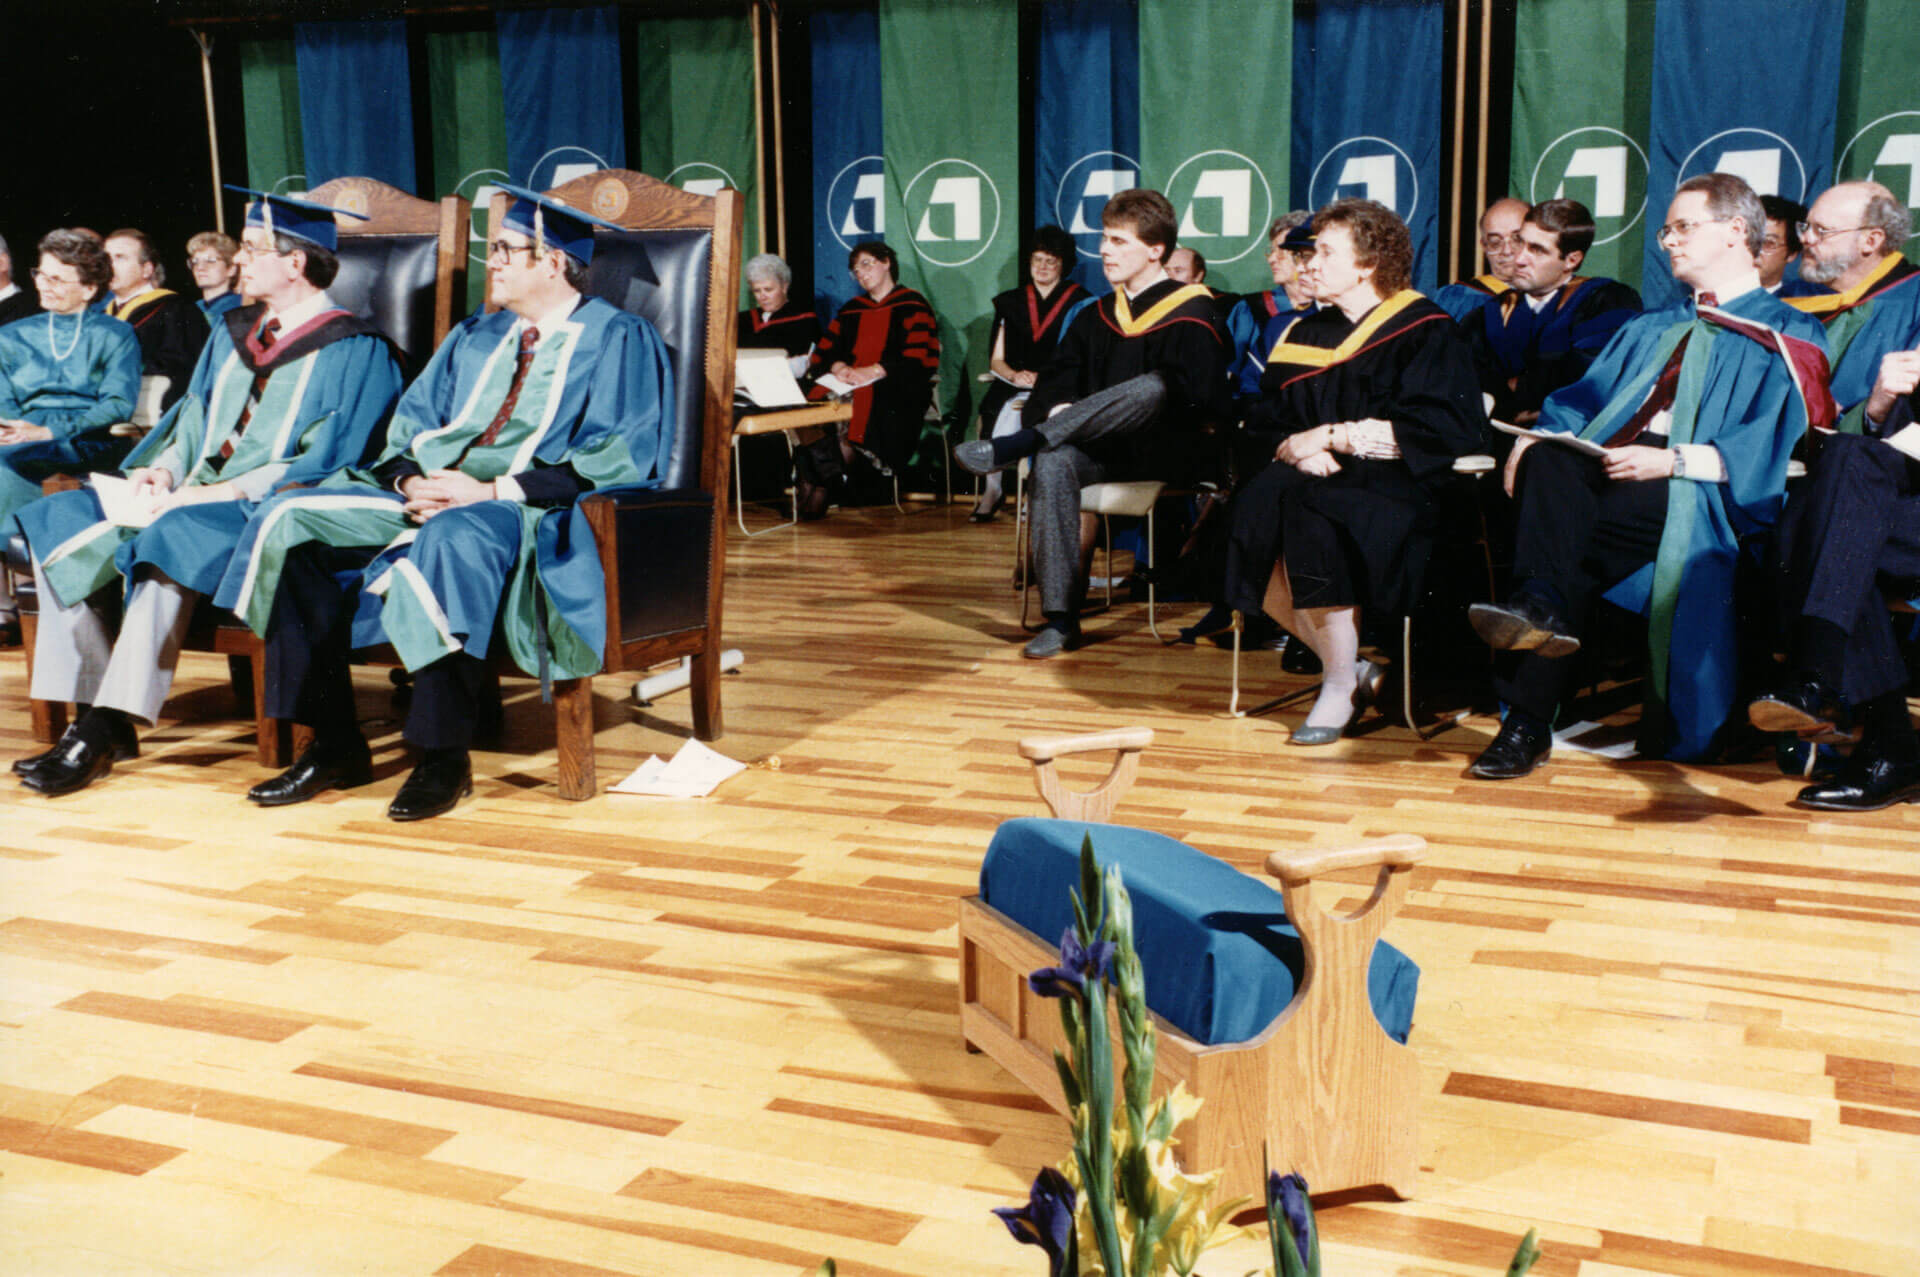 The kneeling stool, shown here in this photo from around 1986, is a ceremonial tradition at convocation ceremonies.